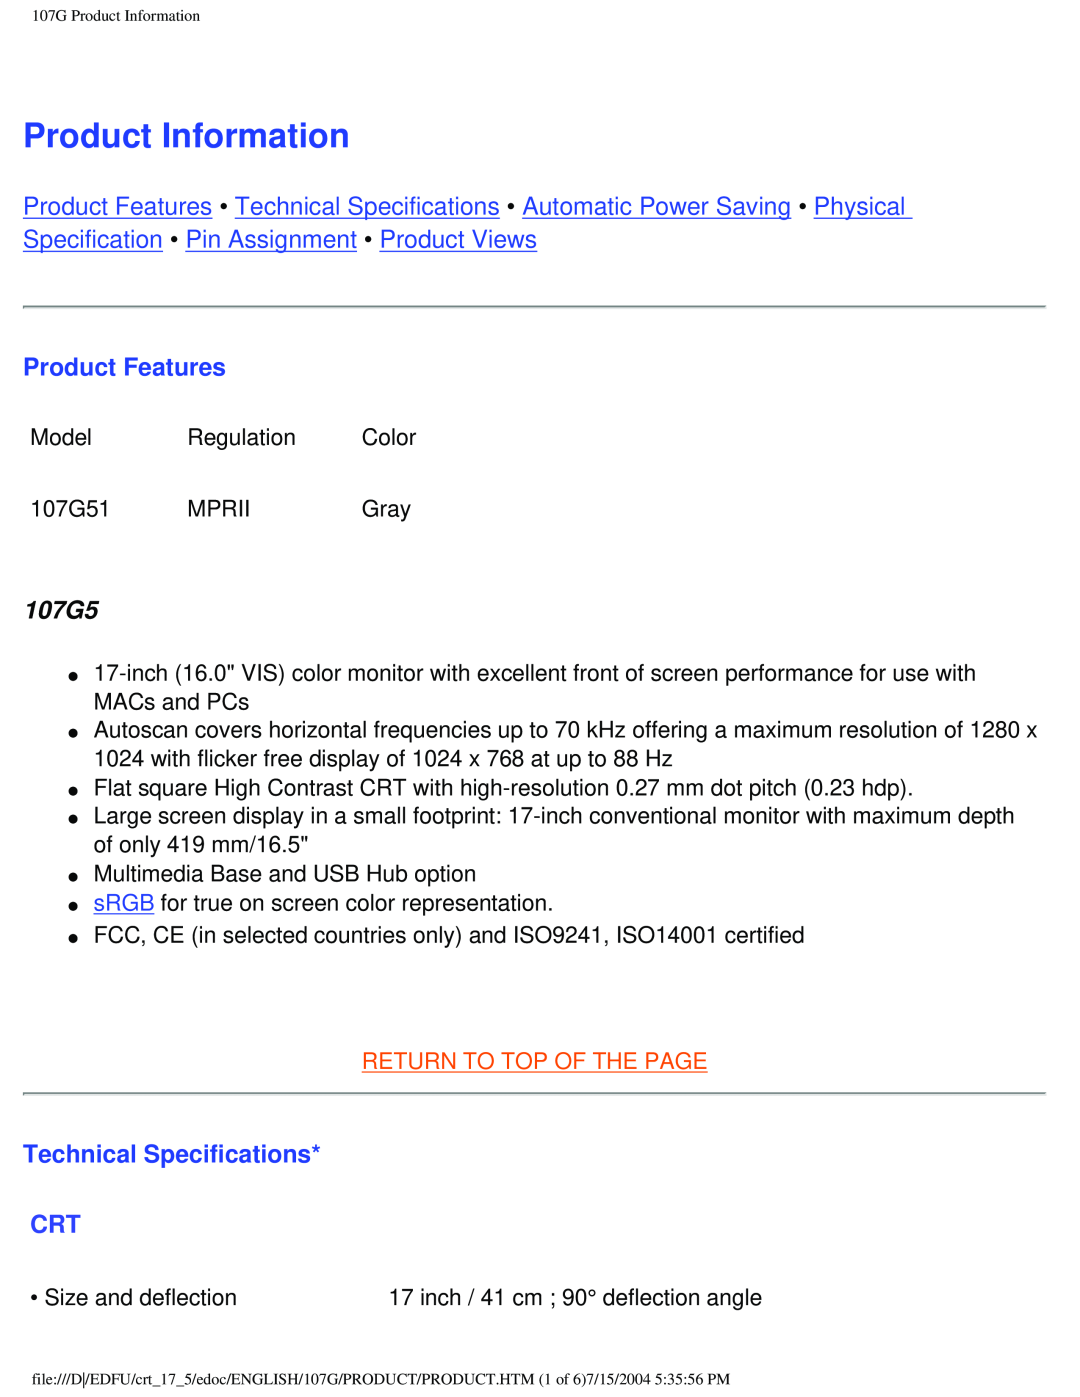 Philips user manual Product Information, Product Features, 107G5, Technical Specifications, Return To Top Of The Page 